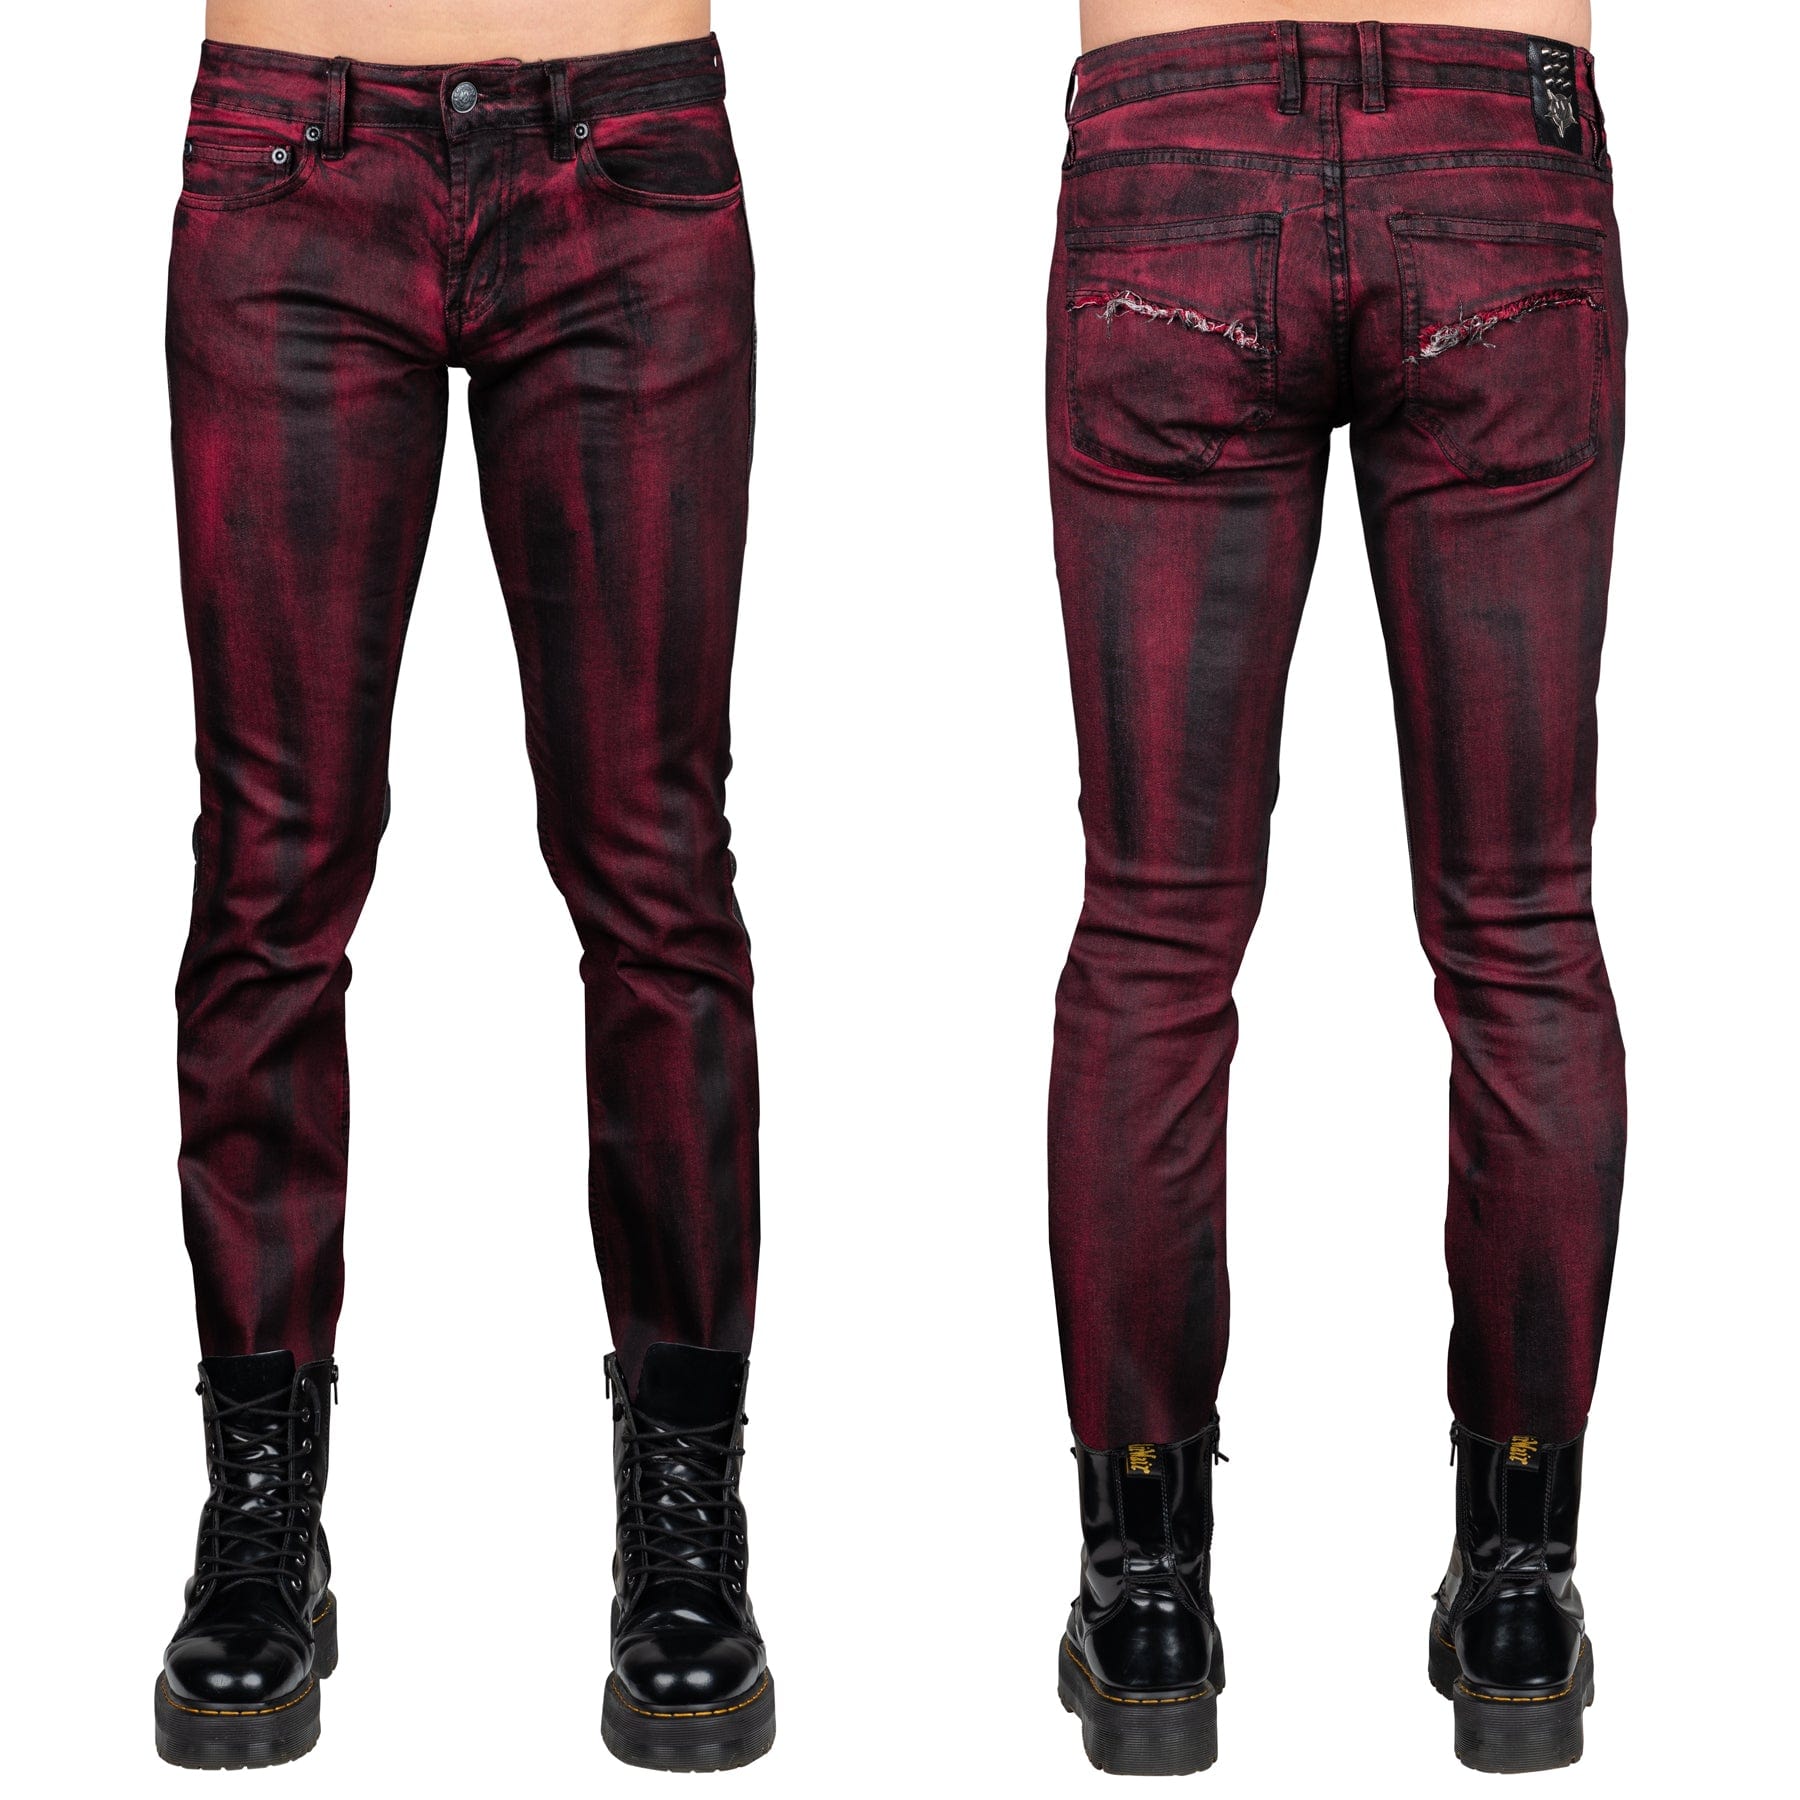 Wornstar Clothing Rampager Coated Jeans - Crimson